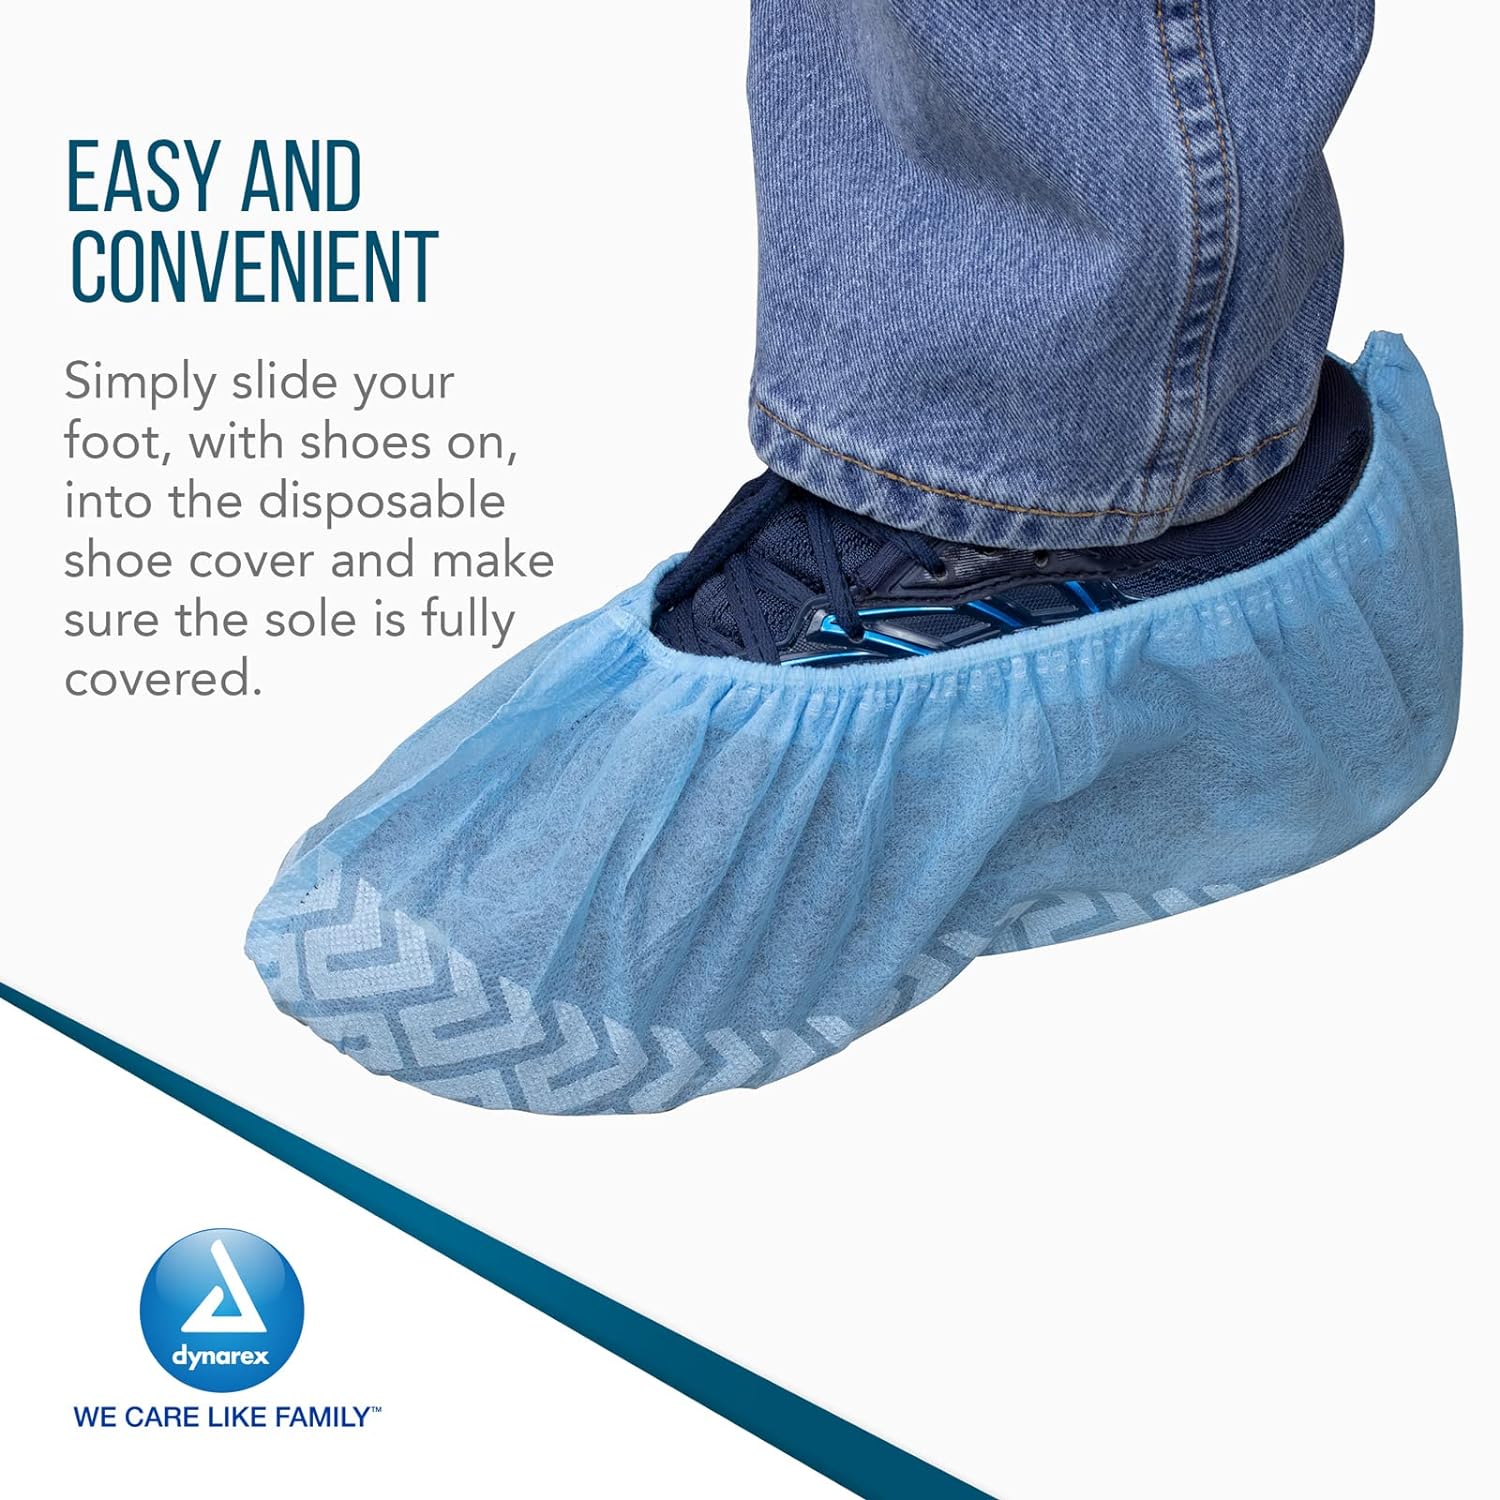 Dynarex Disposable Shoe Cover, Universal Size, Non-Conductive, have Sewn Seams with Elastic Opening and Fits Most Shoes, Blue, 1 Box of 150 pairs